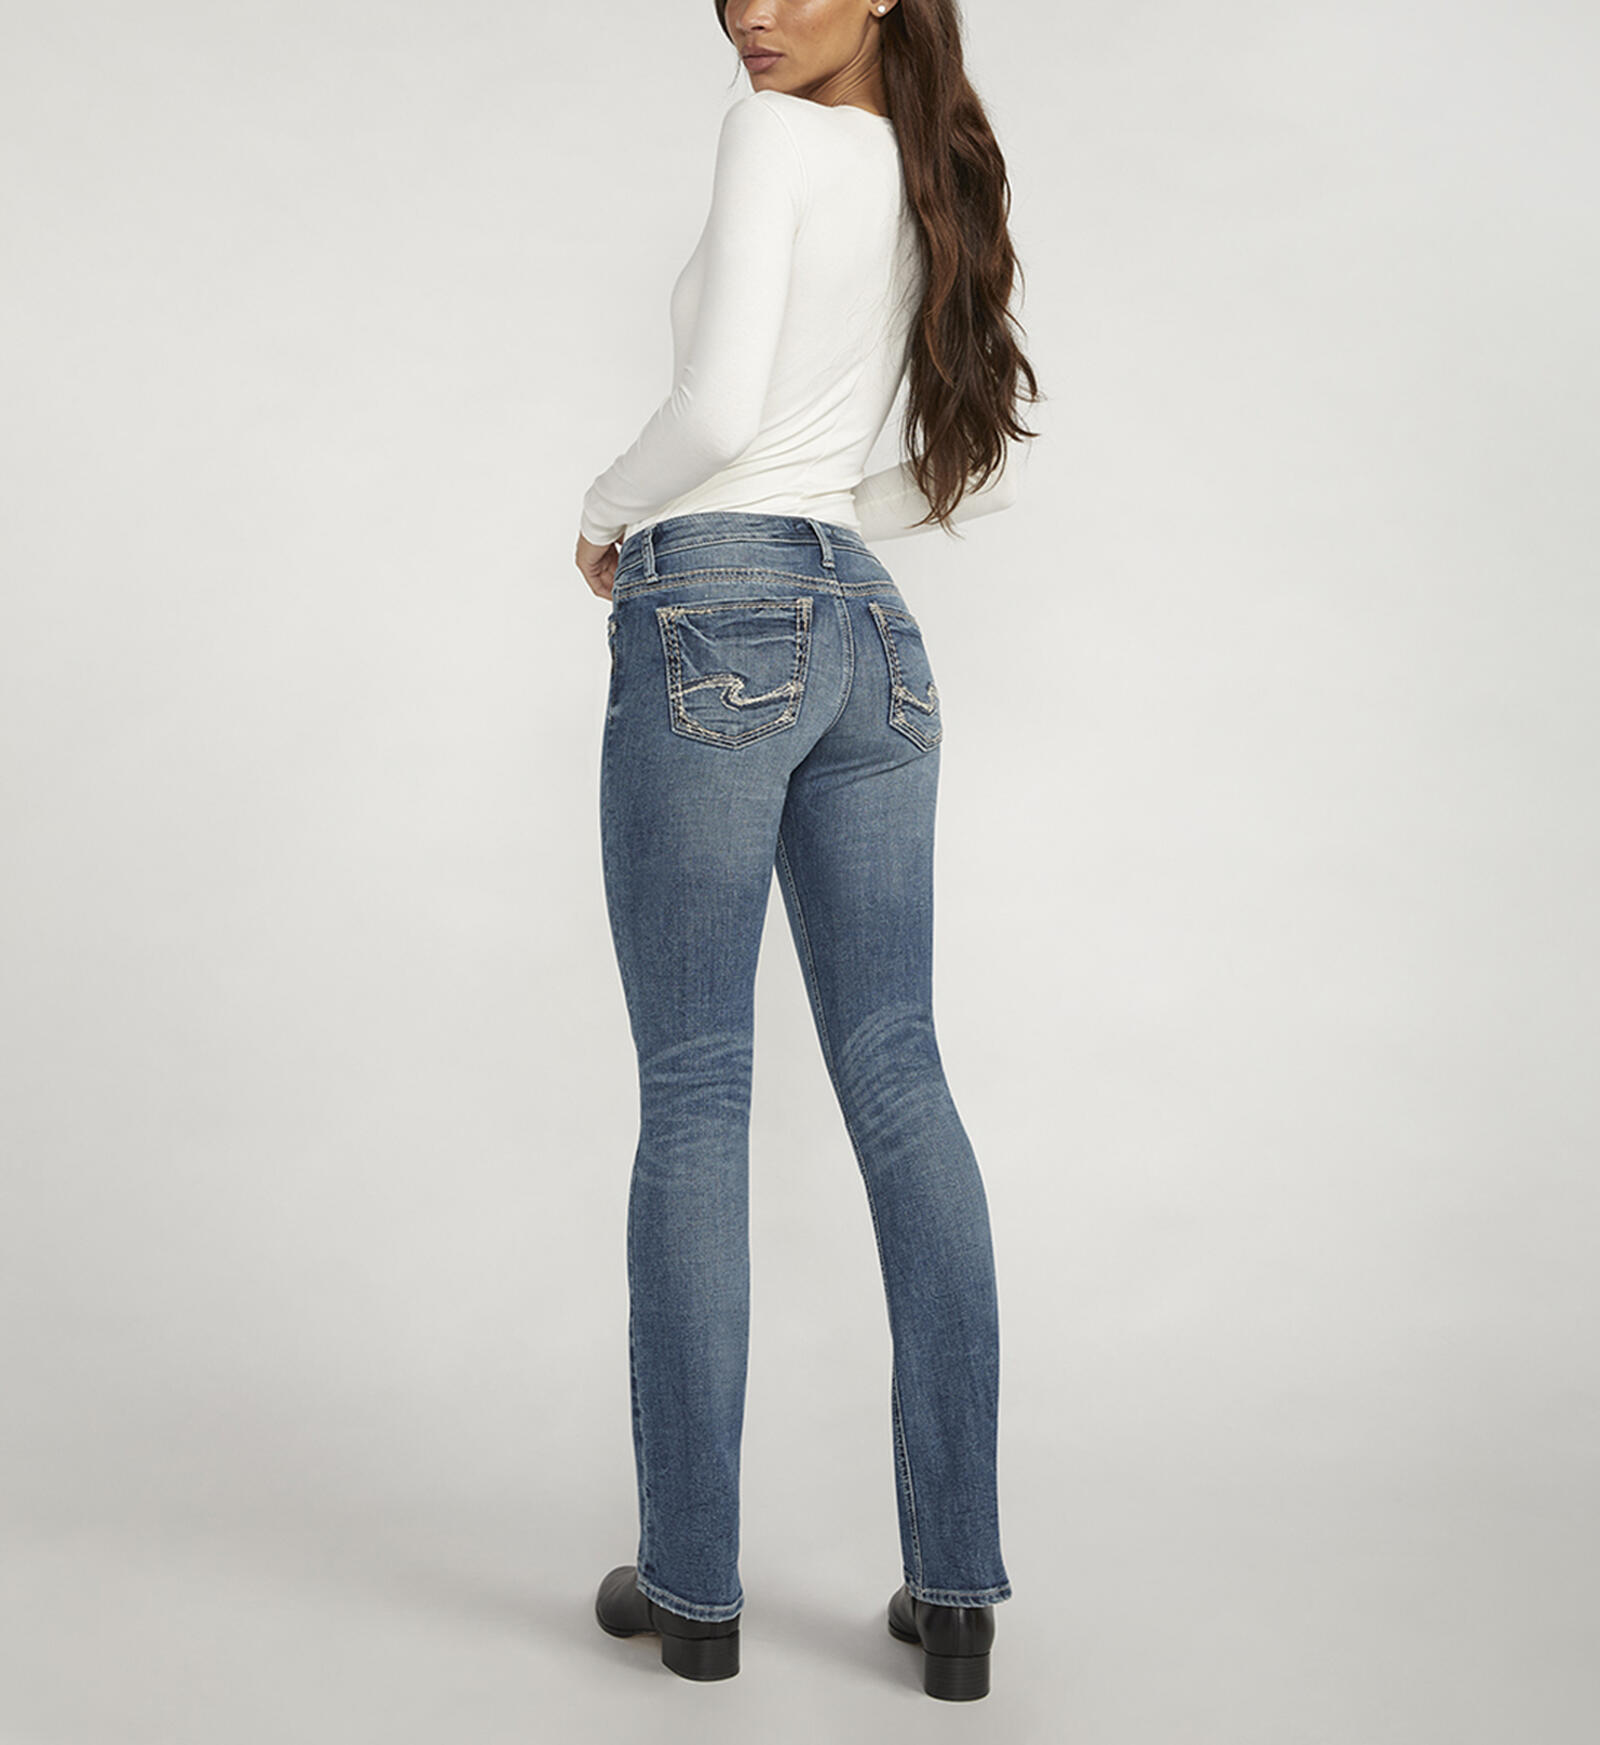 Buy Tuesday Low Rise Slim Bootcut Jeans for USD 88.00